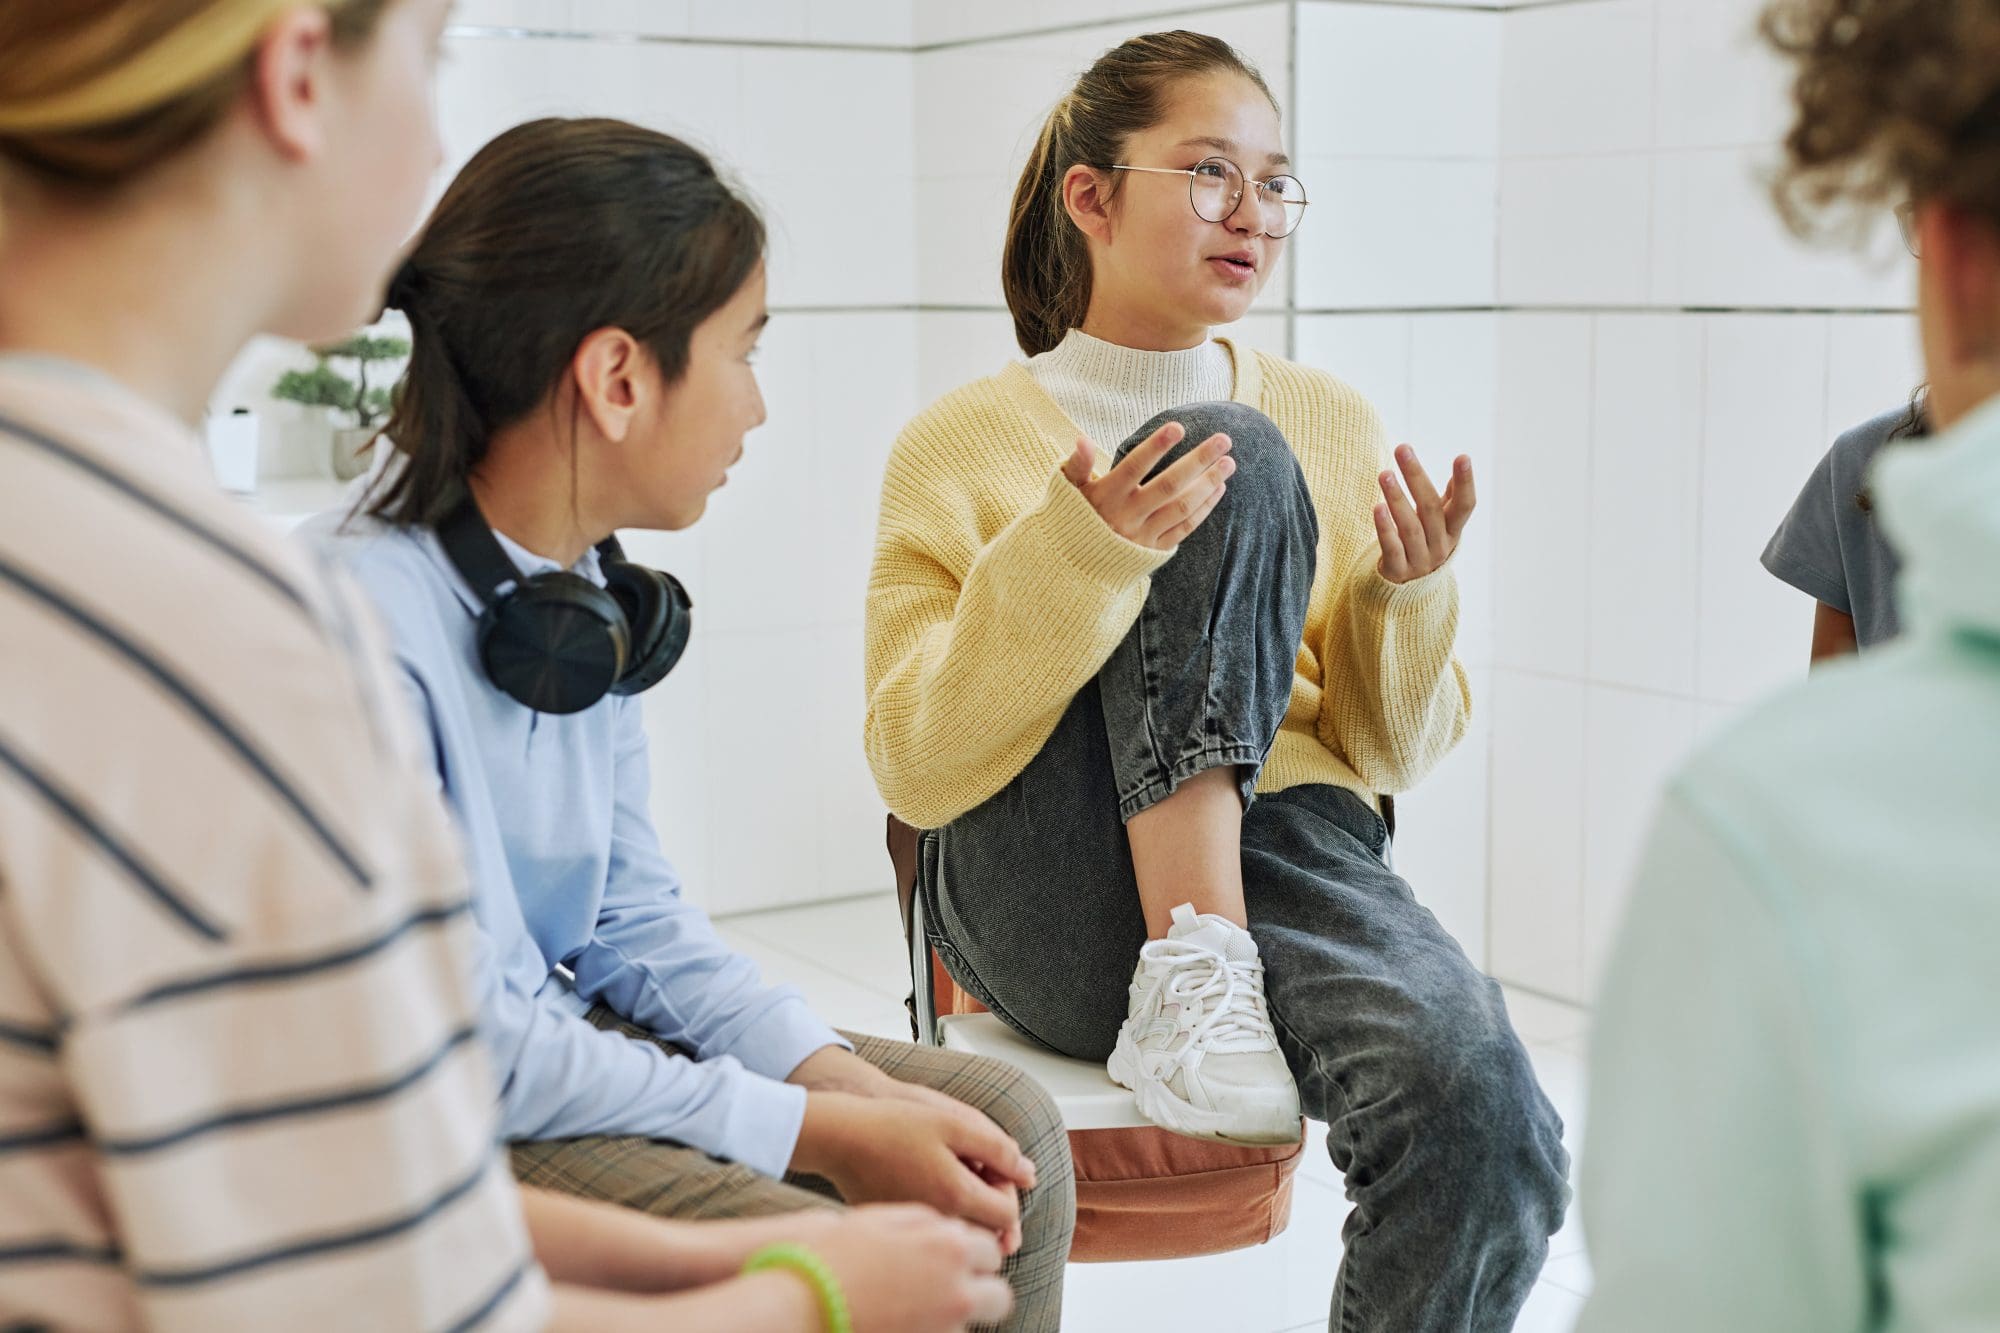 Adolescents, teens, and young adults in group therapy session during outpatient treatment.